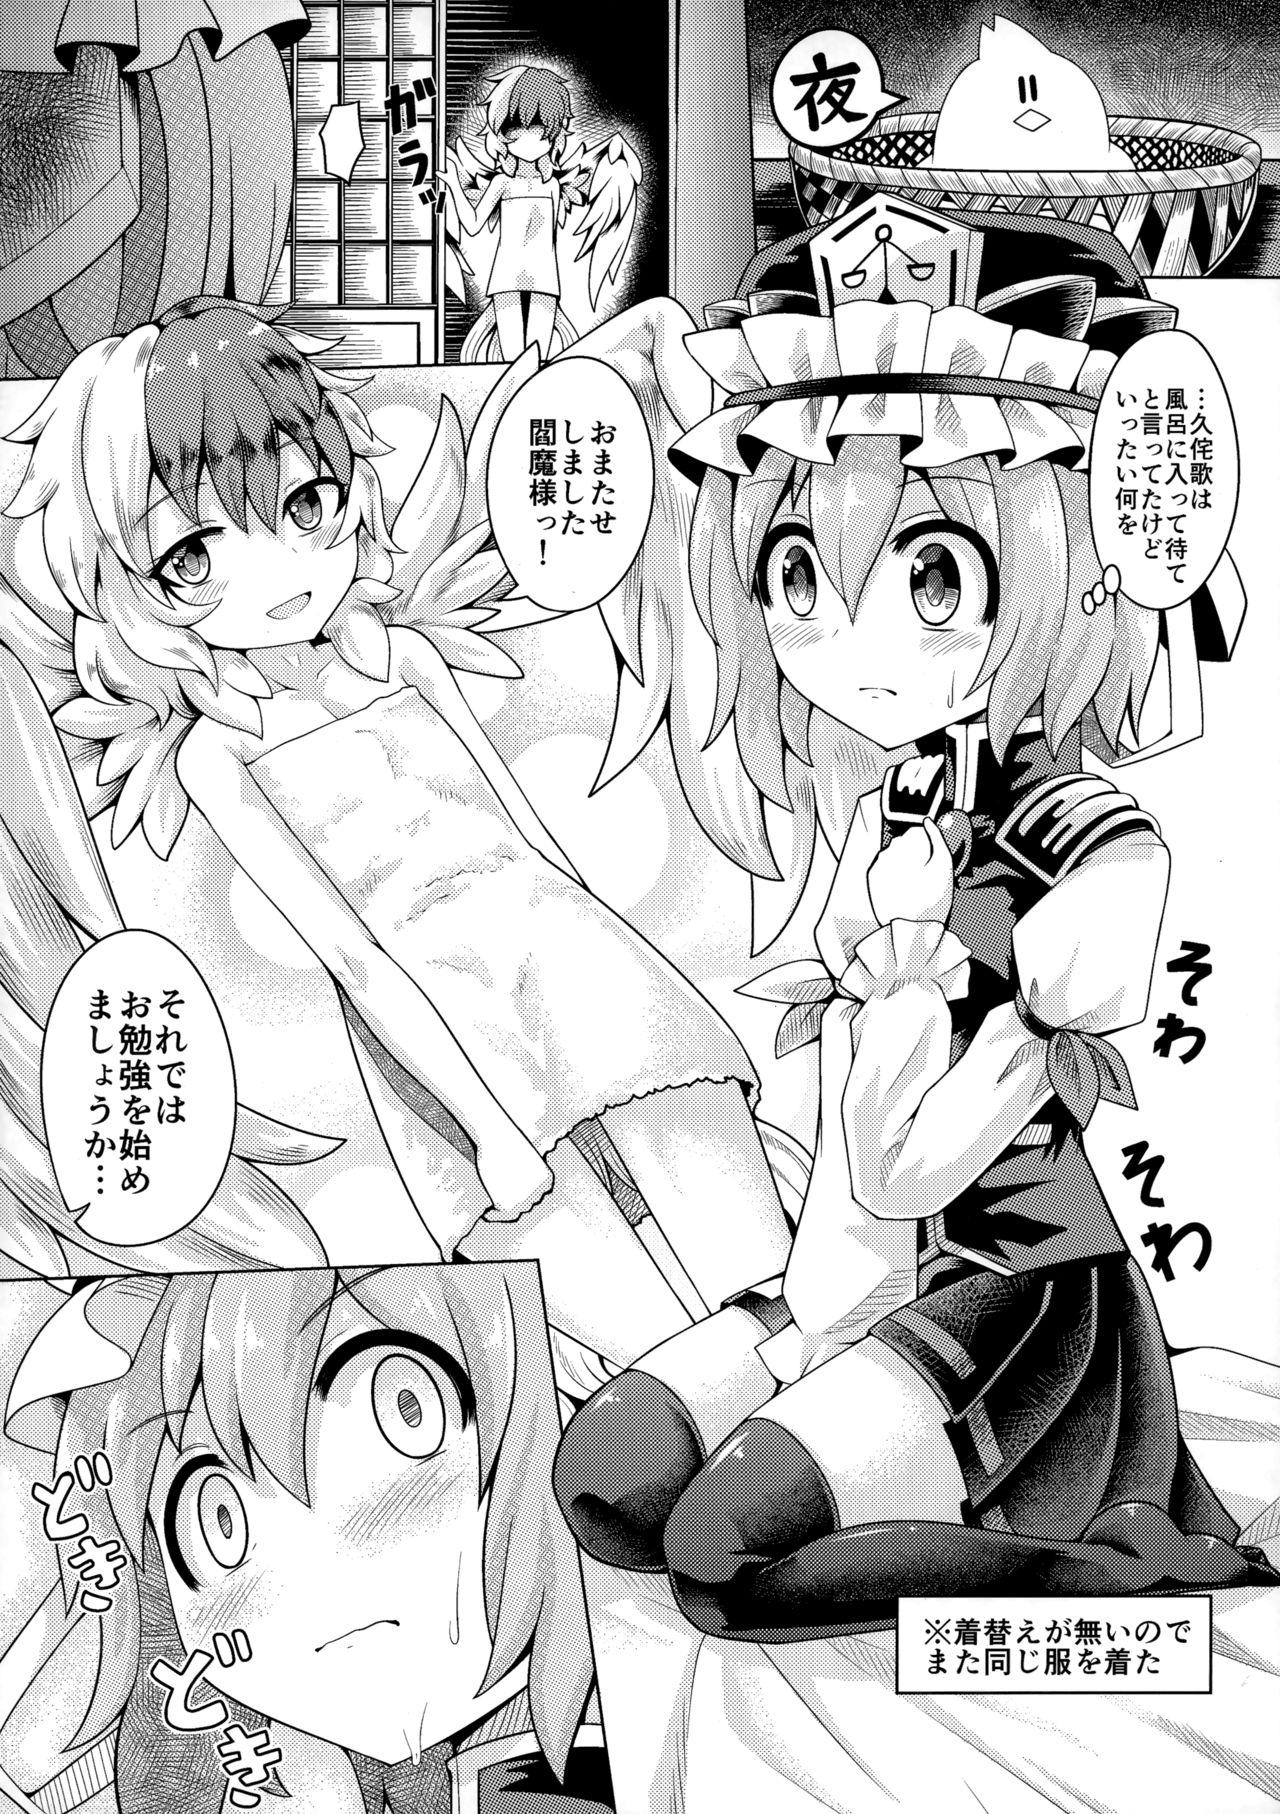 Sis Reverse Sexuality 9 - Touhou project Secret - Page 5